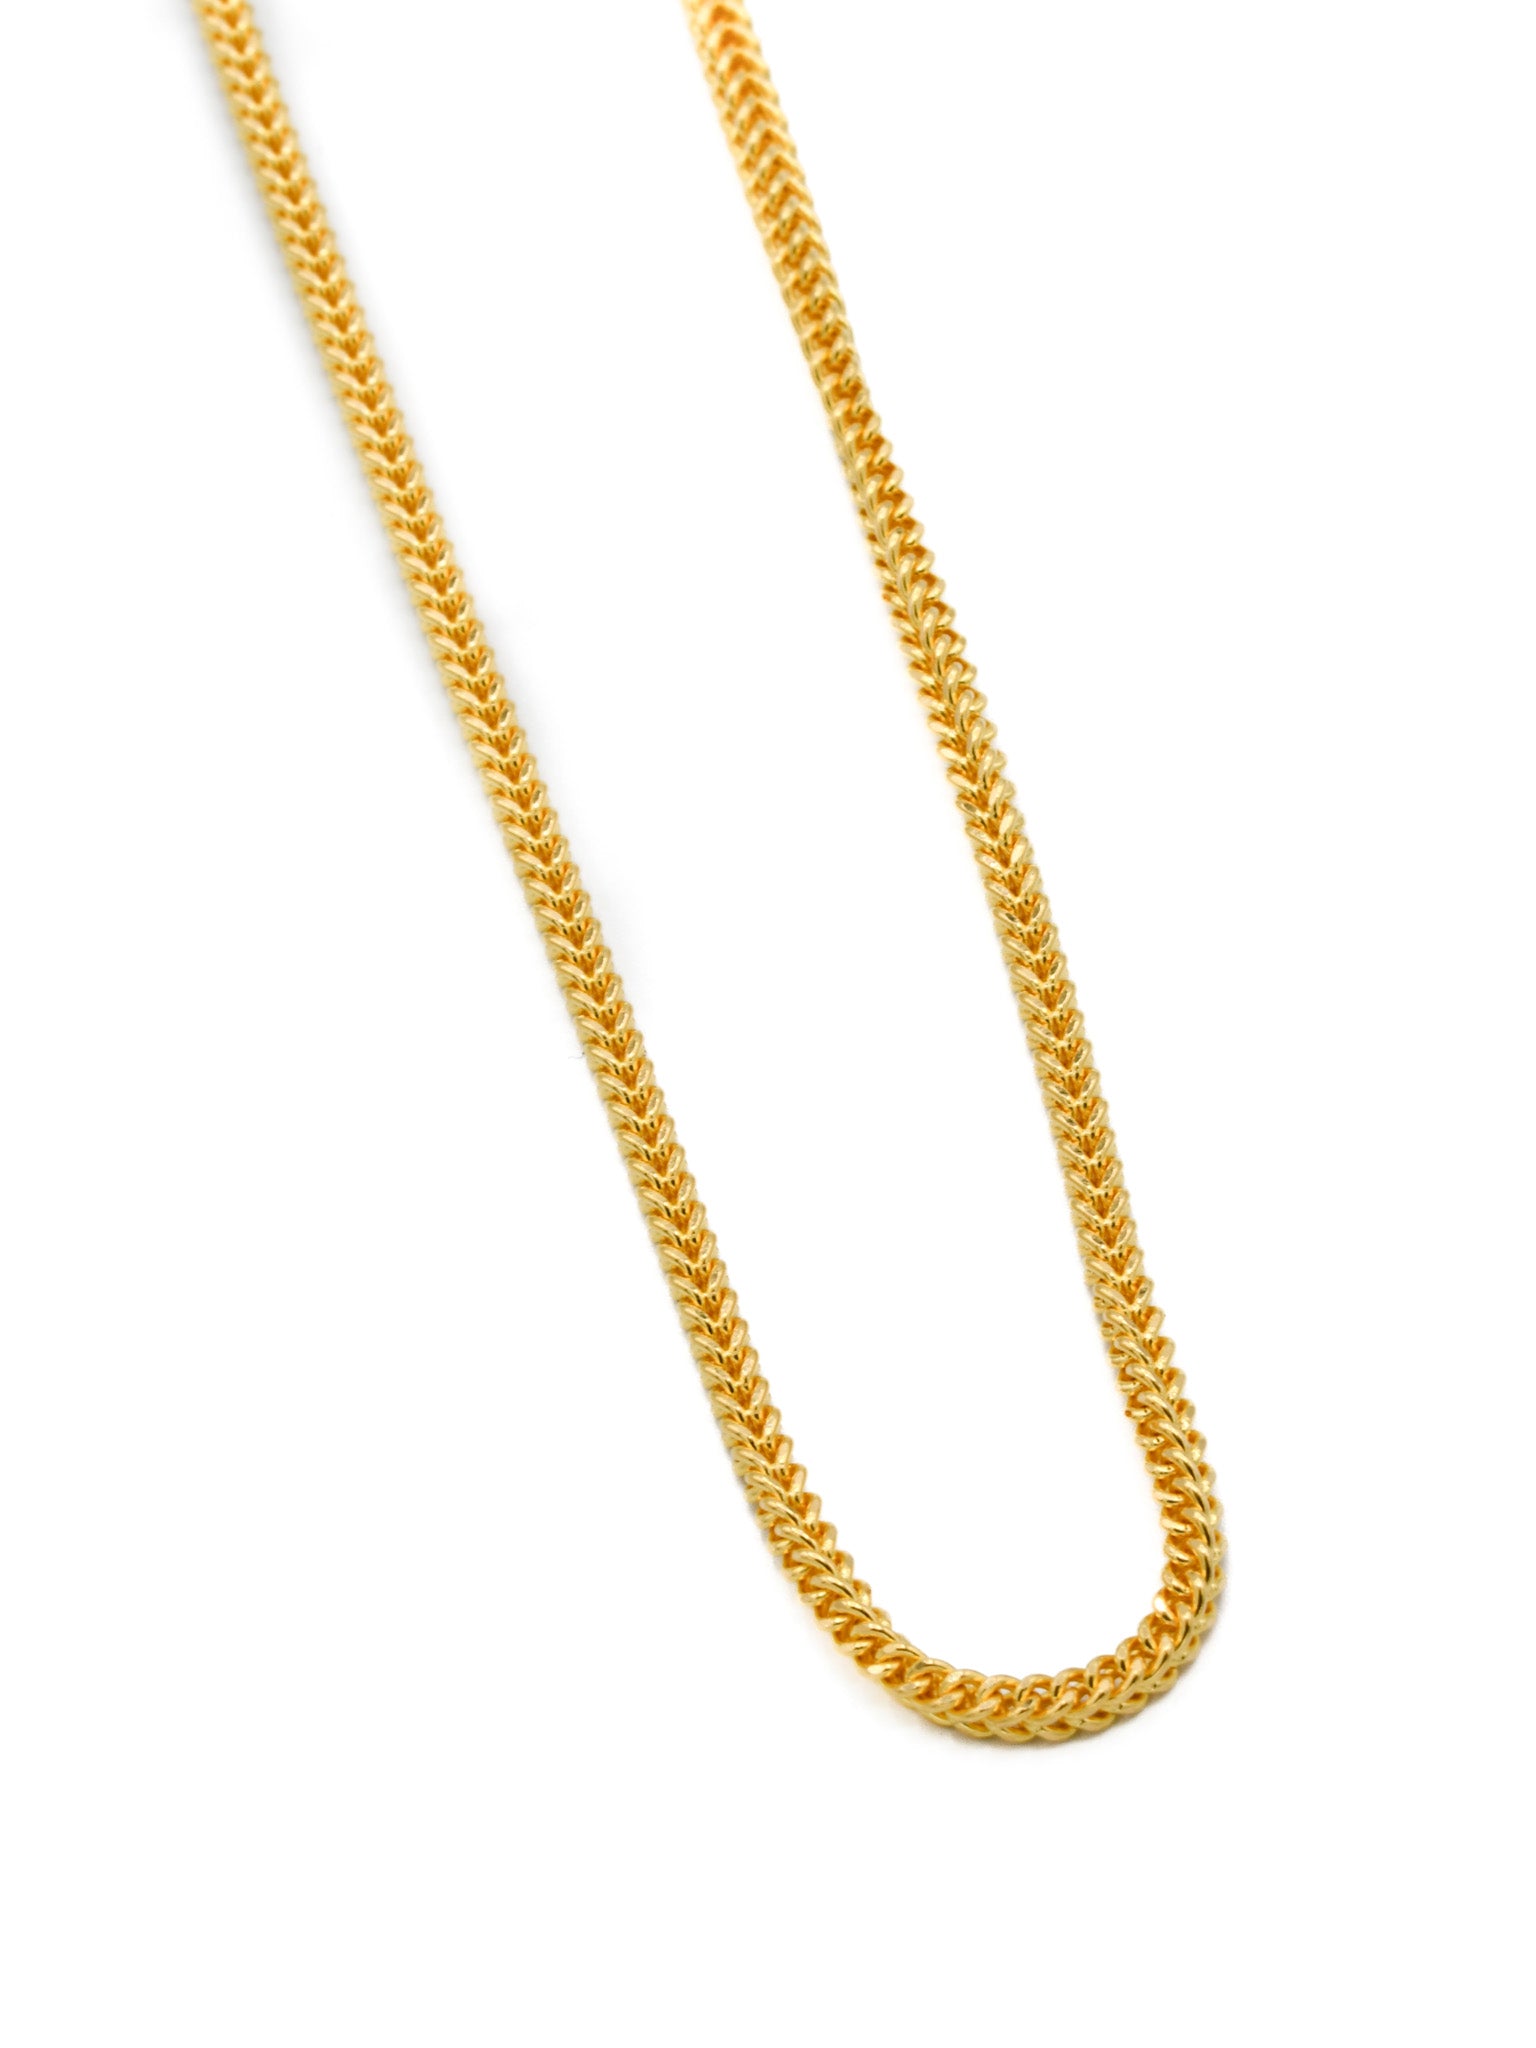 22ct Gold Hollow Fox Tail Chain - 50 cm - Roop Darshan